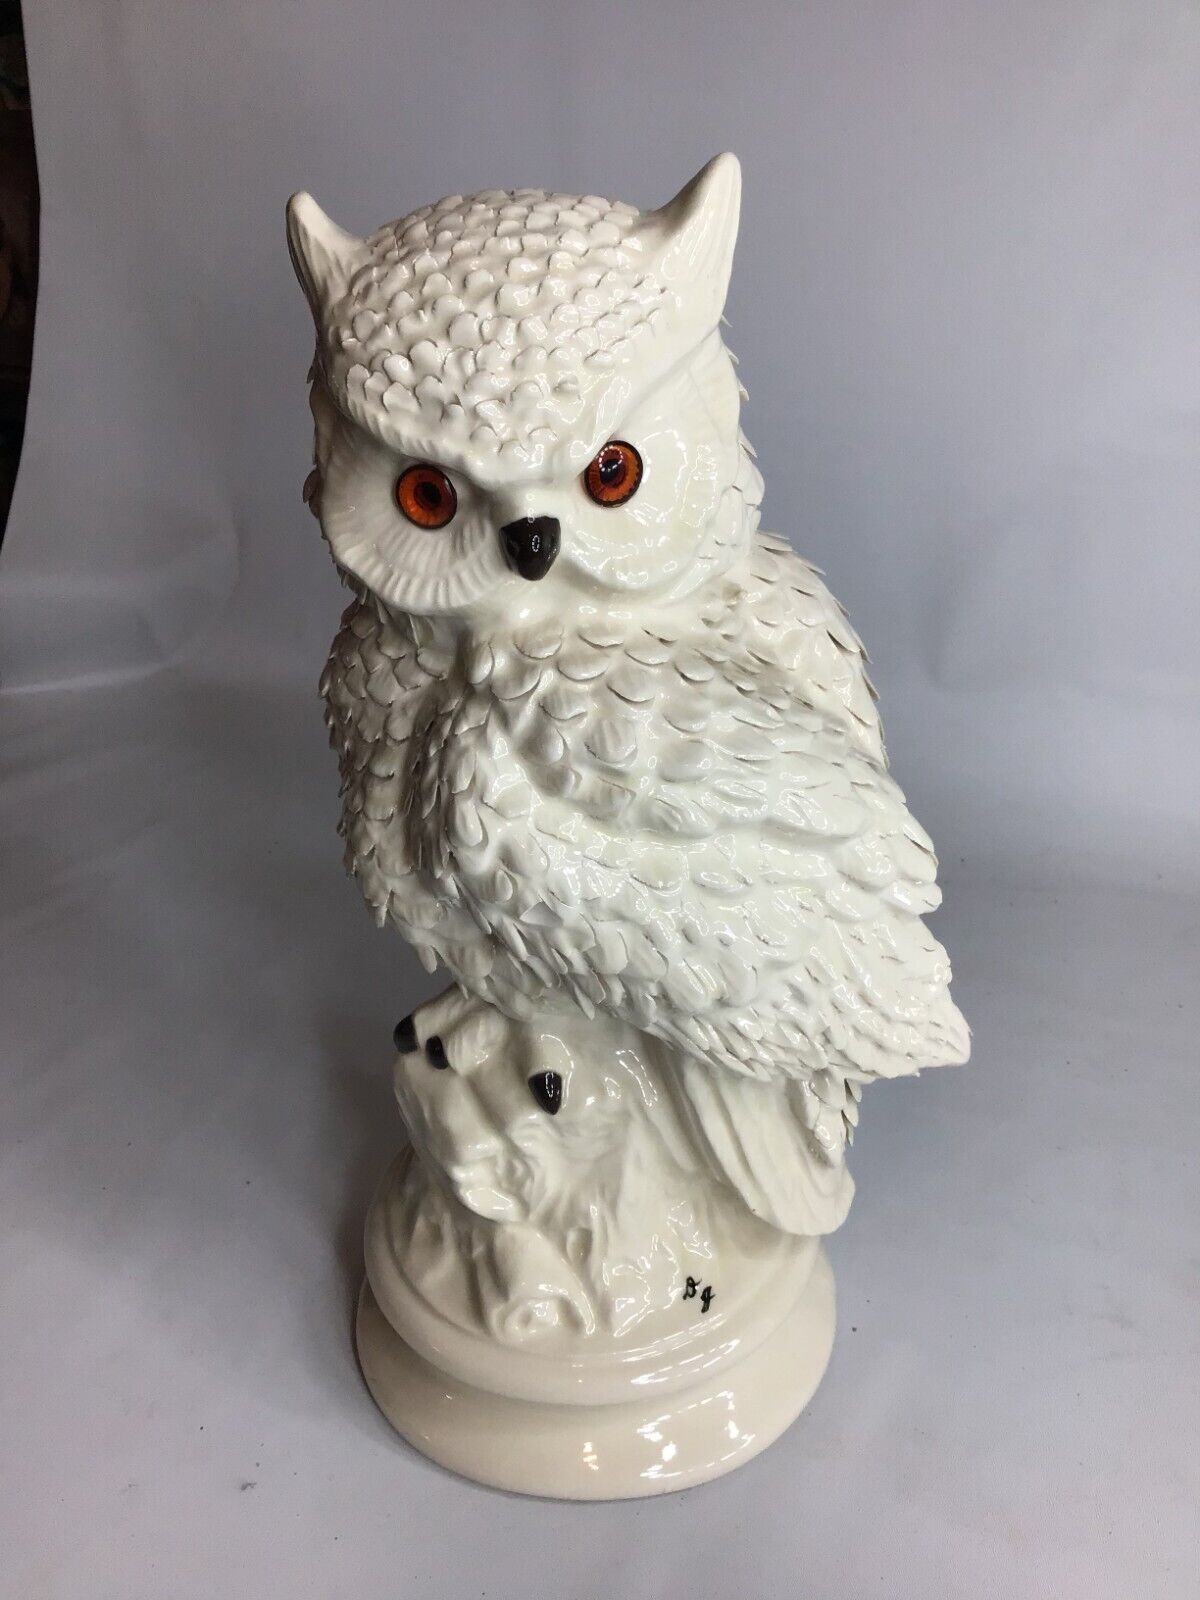 1970’s White Ceramic Owl Signed Mary Jon Statue  12in high  Beautiful  Detailed